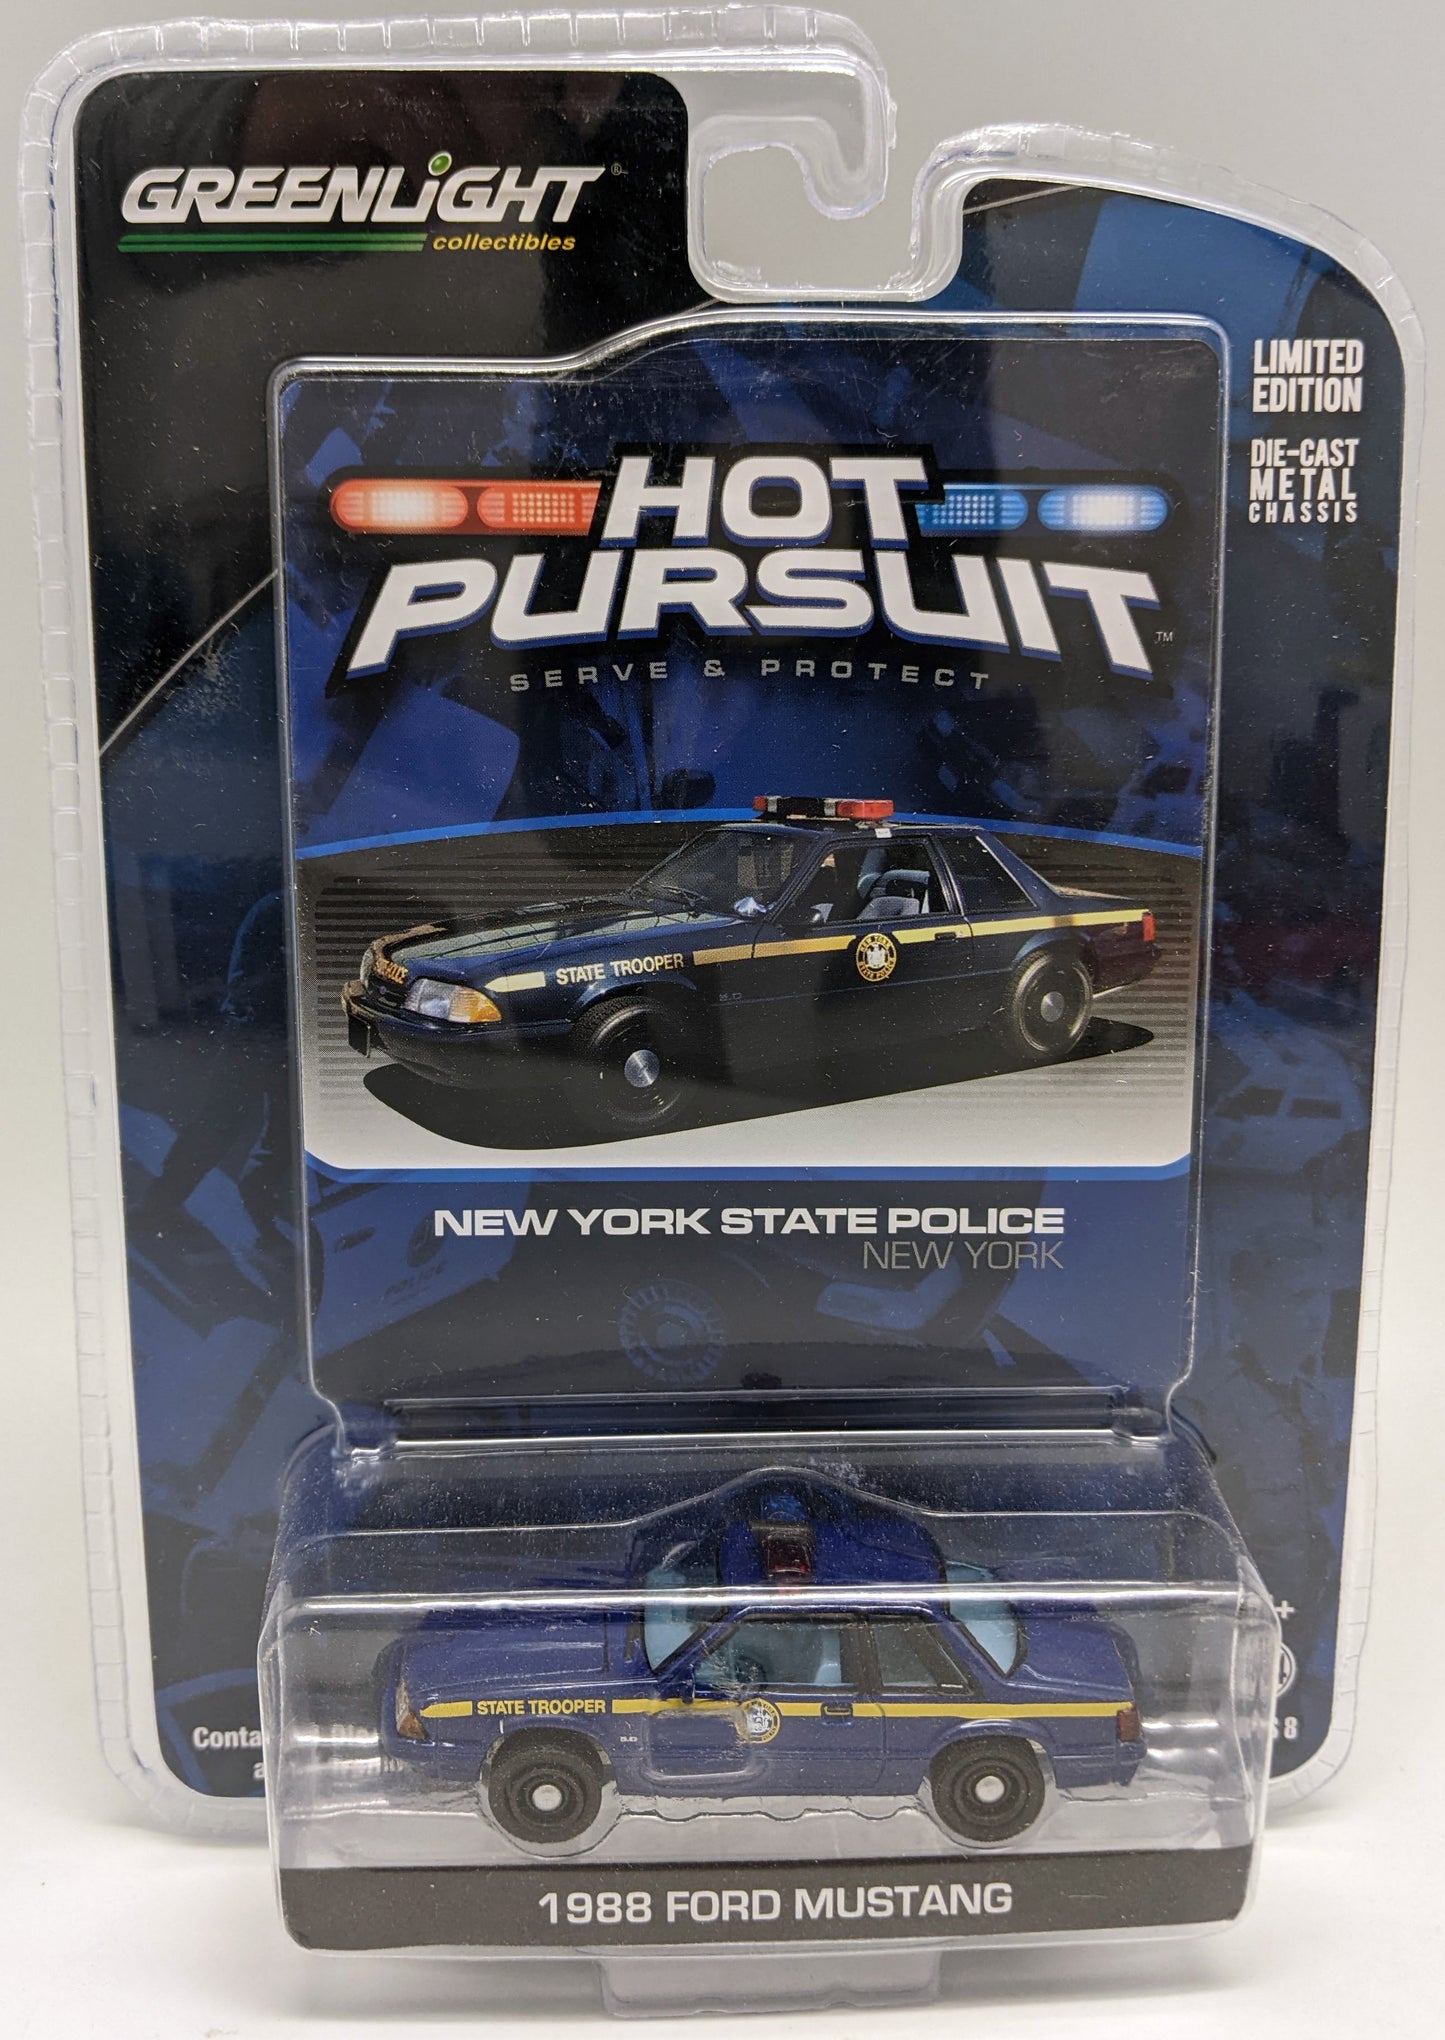 GL - 1988 Ford Mustang - Hot Pursuit New York State Police